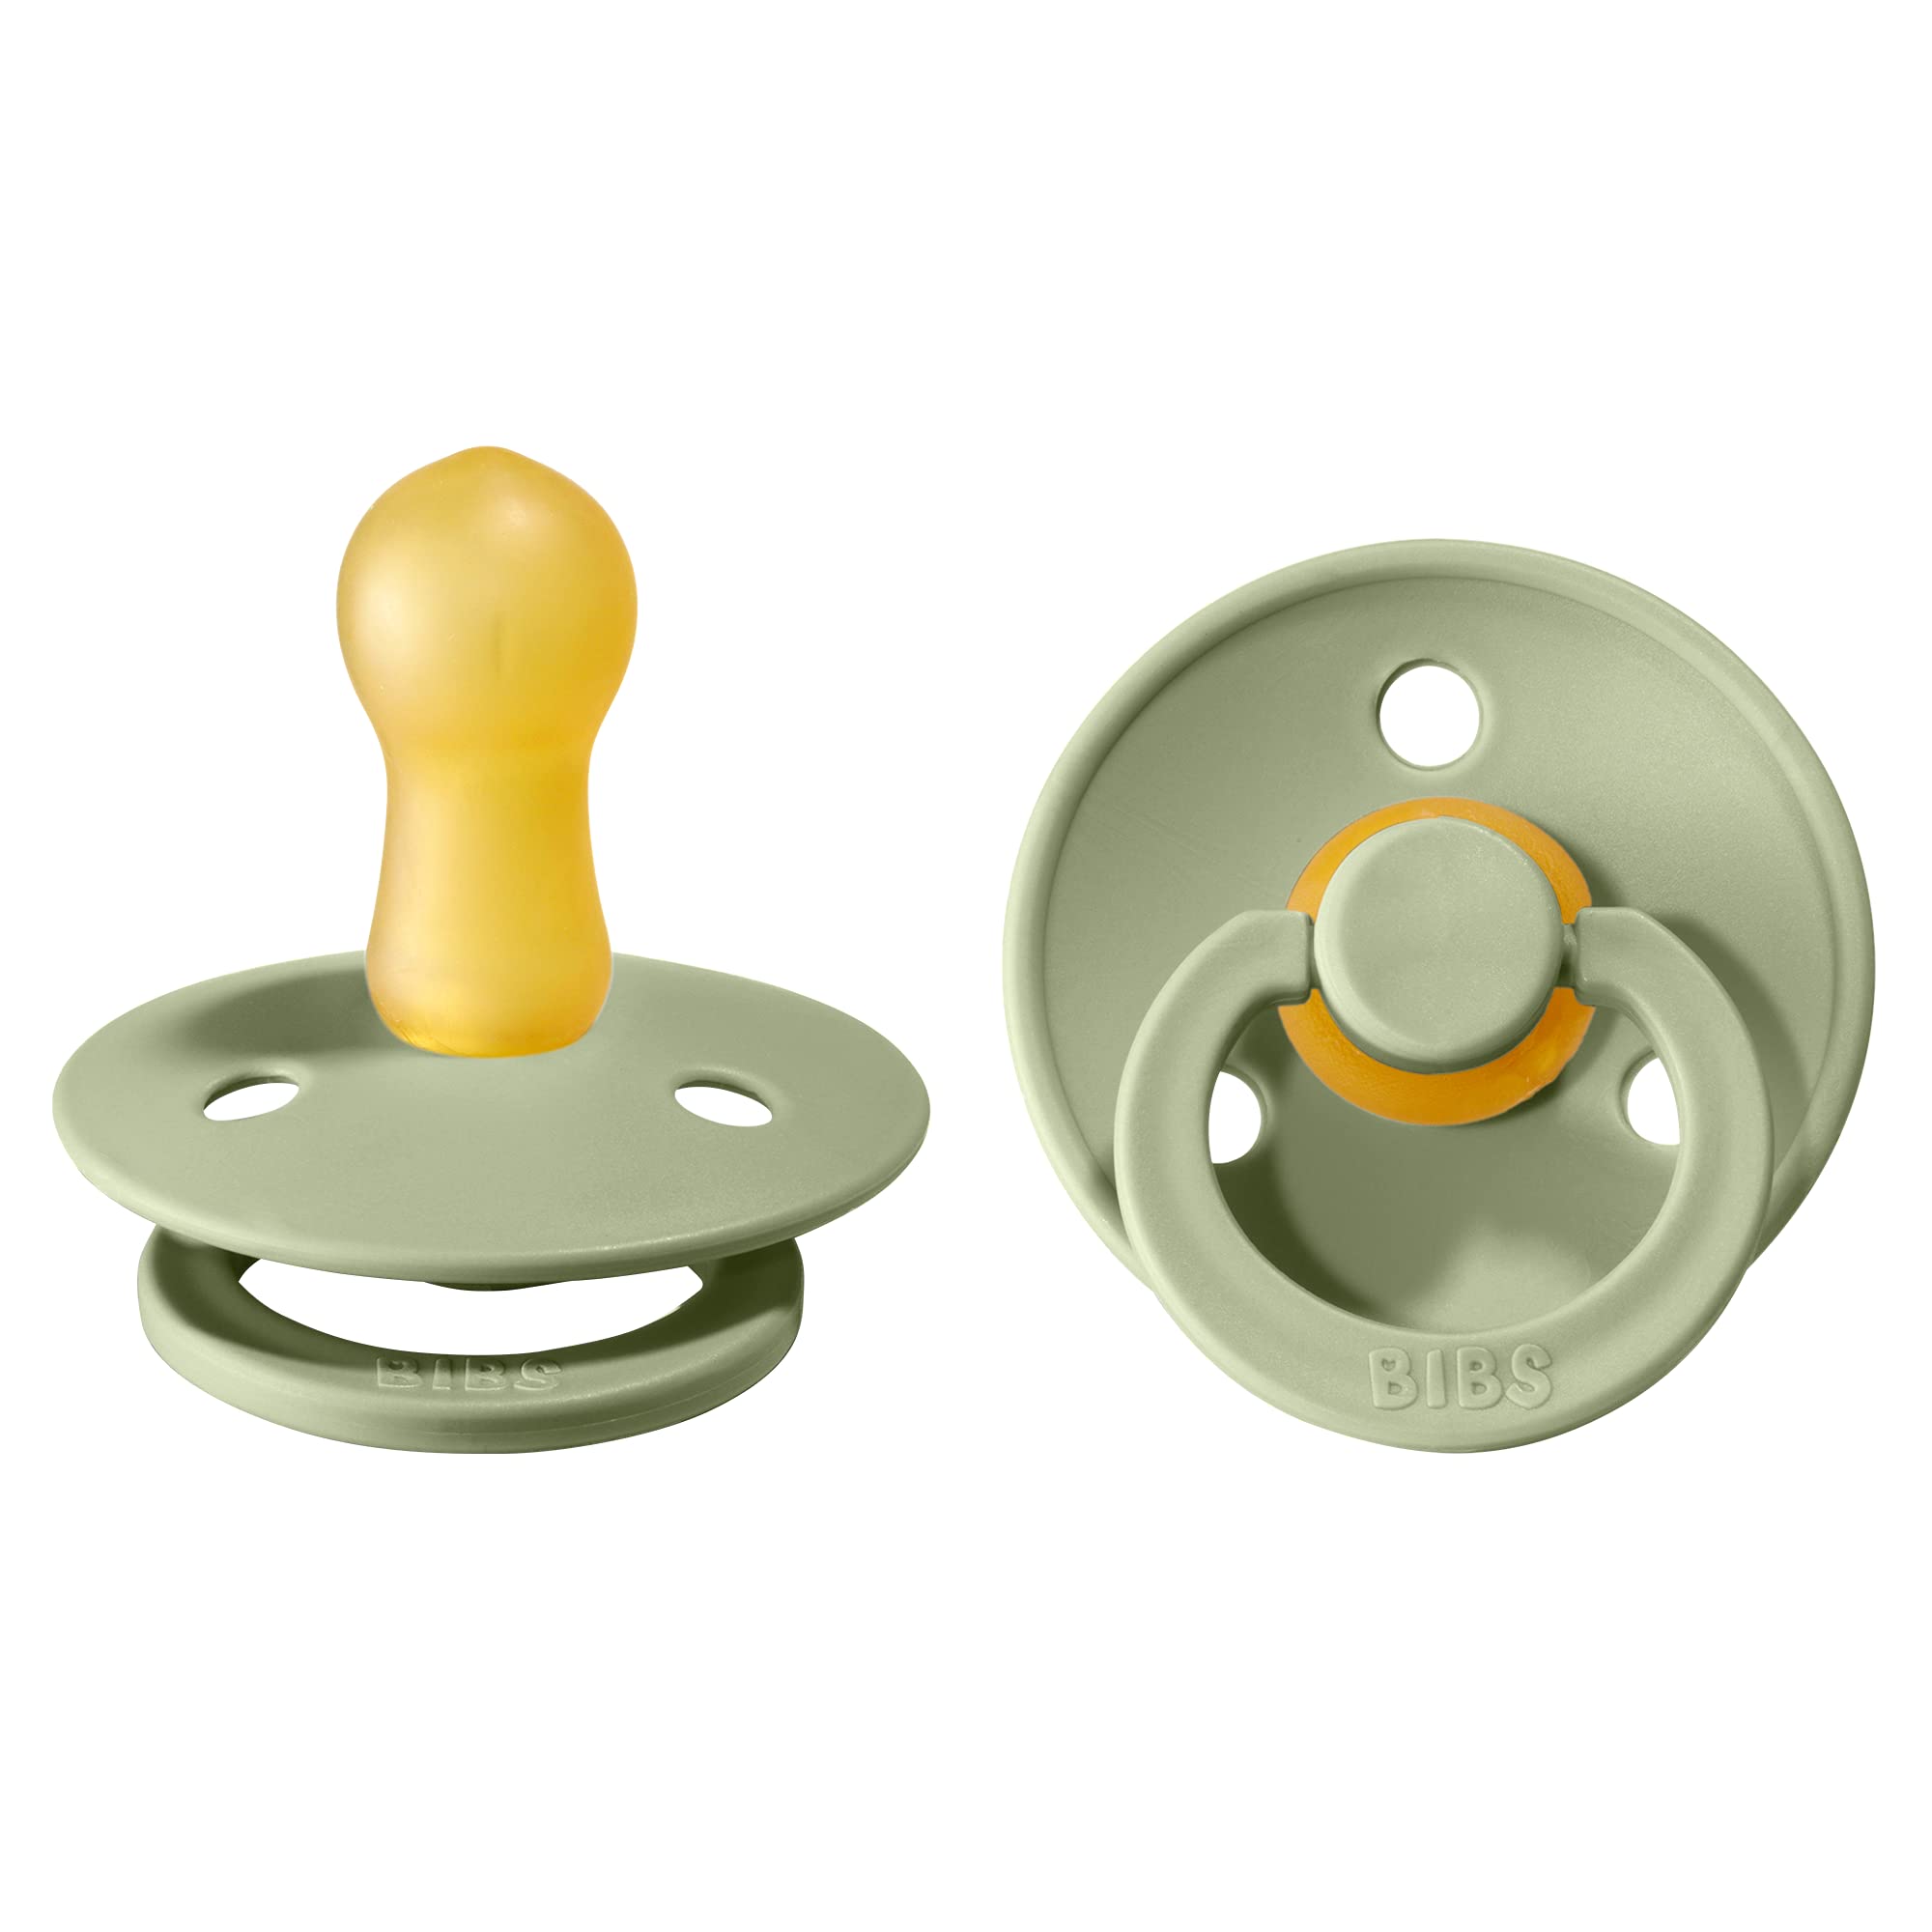 BIBS Pacifiers  Natural Rubber Baby Pacifier  Set of 2 BPA-Free Soothers  Made in Denmark  Sage  Size 6-18 Months